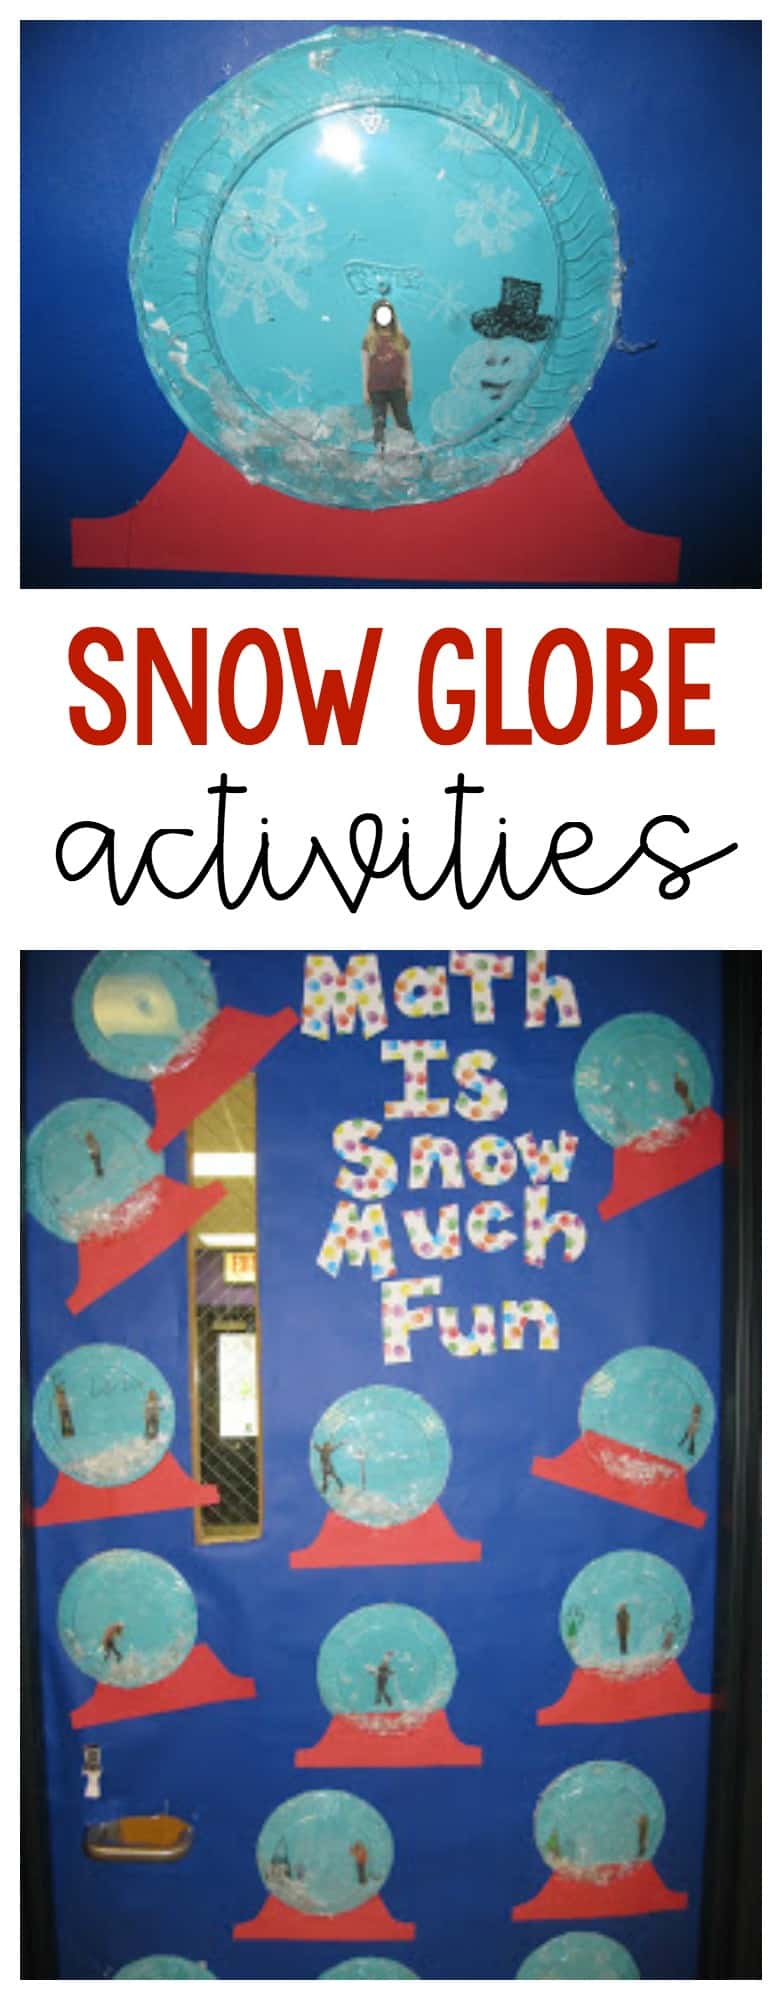 Directions for an upper elementary snowglobe